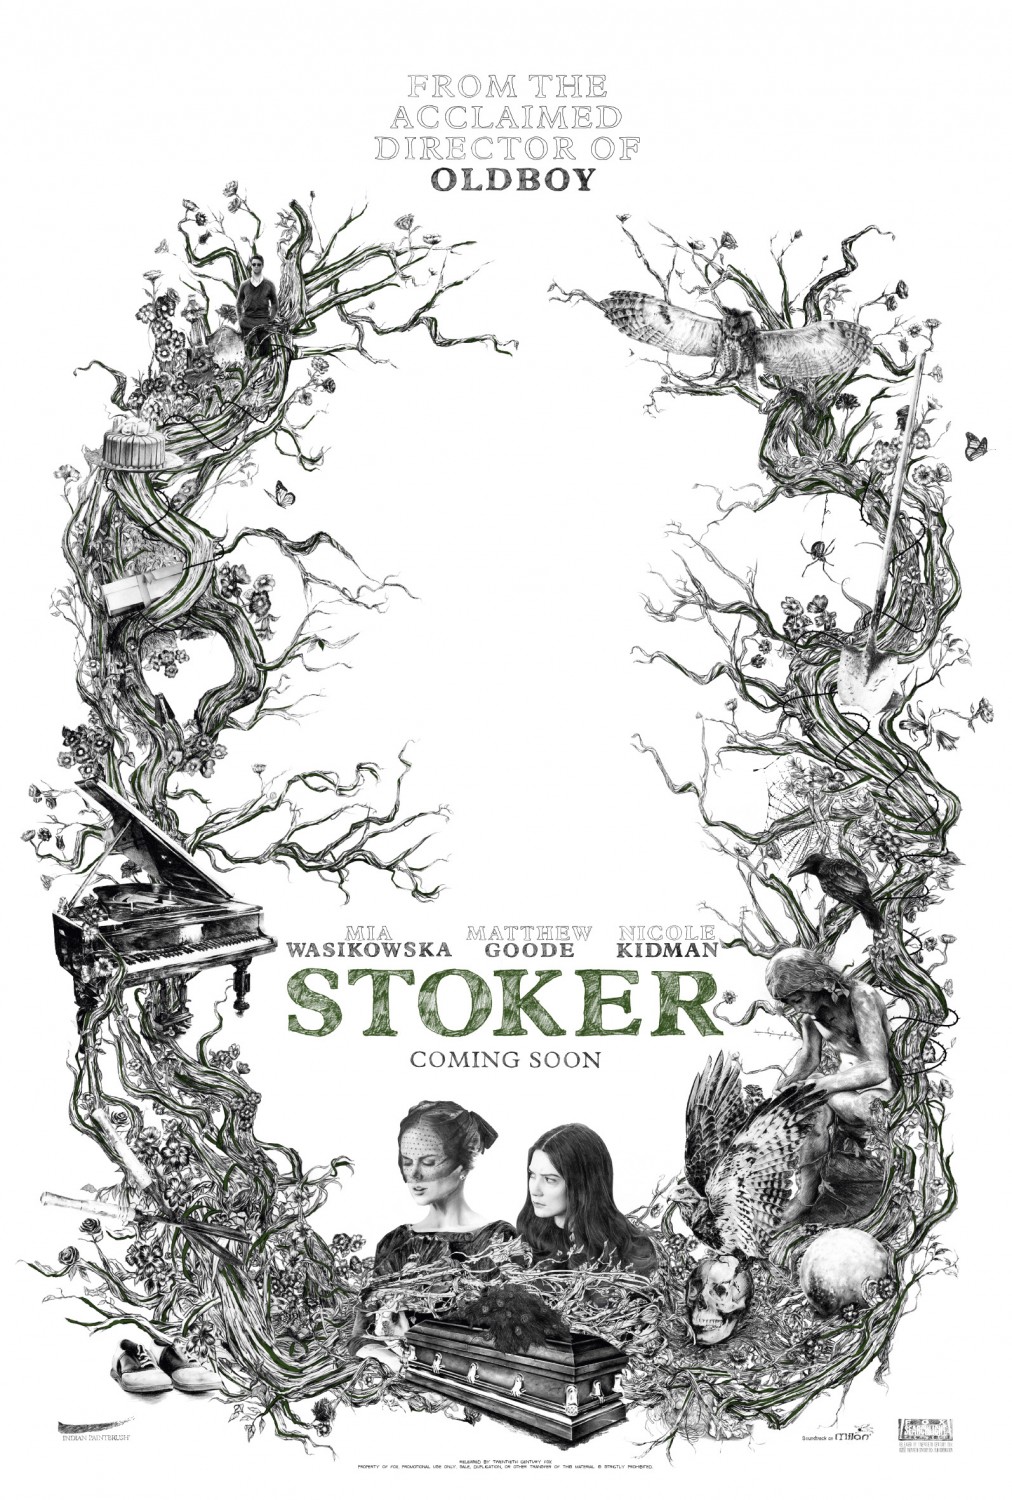 Extra Large Movie Poster Image for Stoker (#1 of 7)